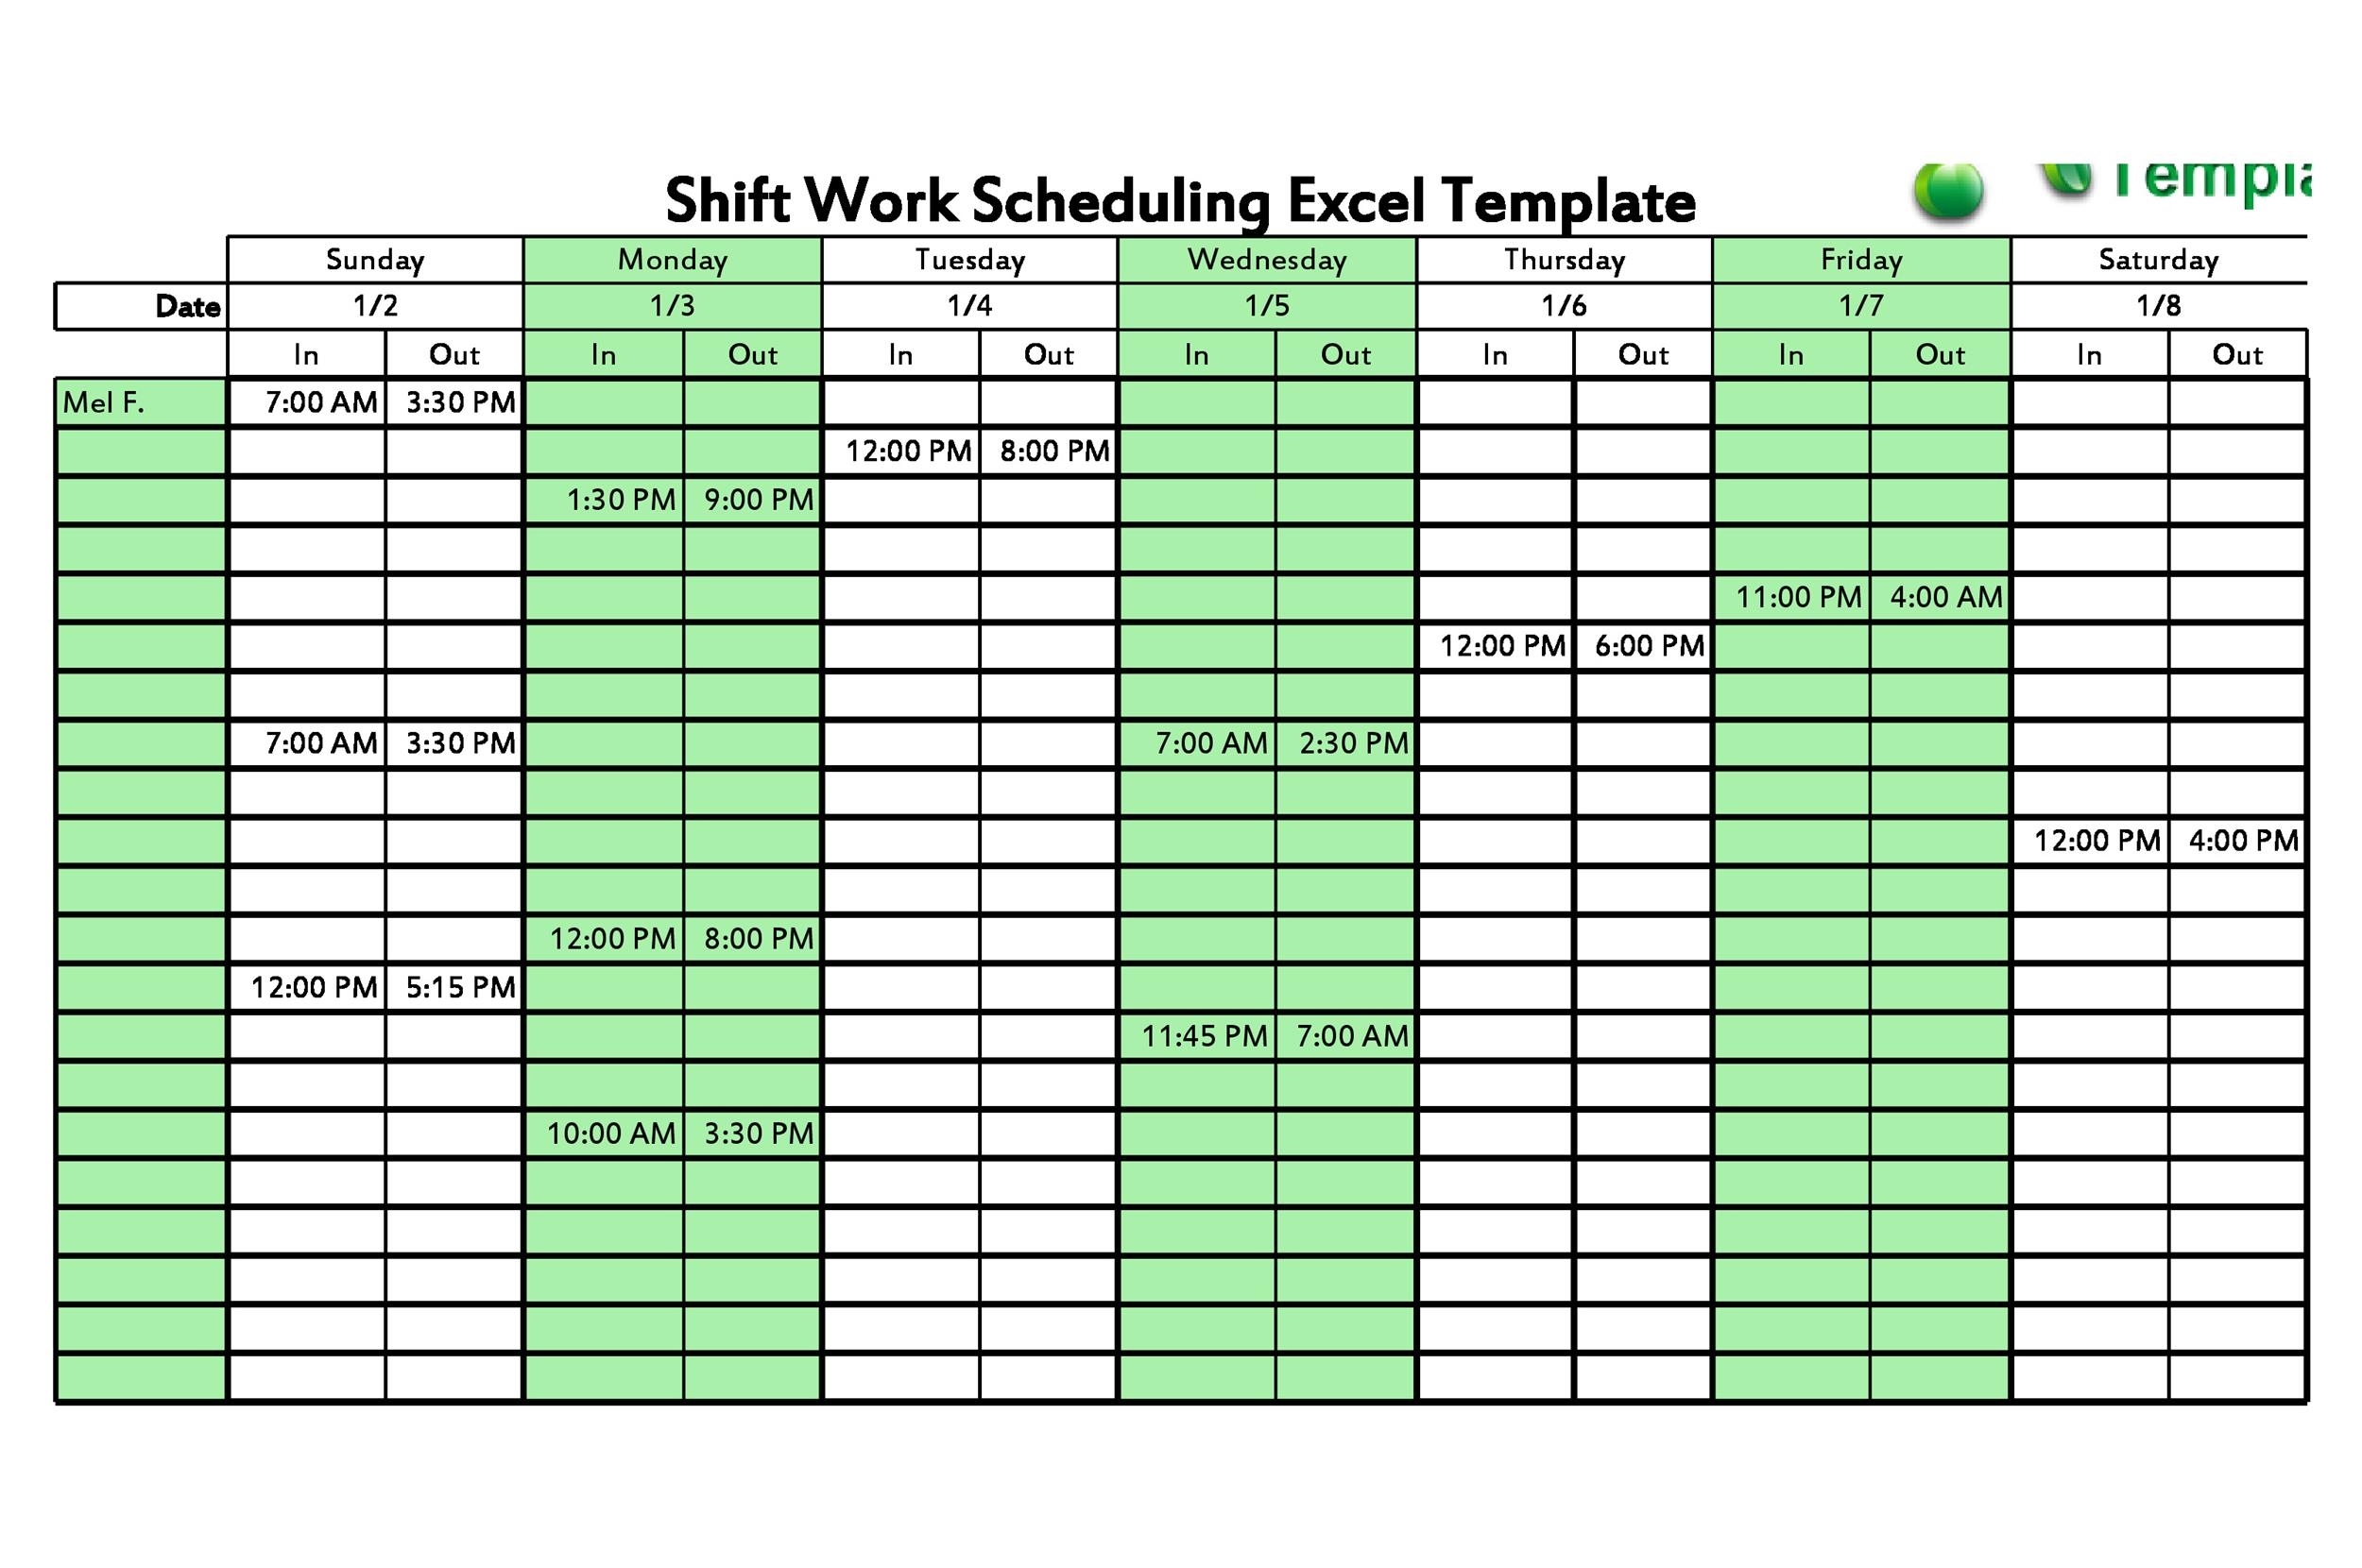 14 Dupont Shift Schedule Templats For Any Company [Free] ᐅ